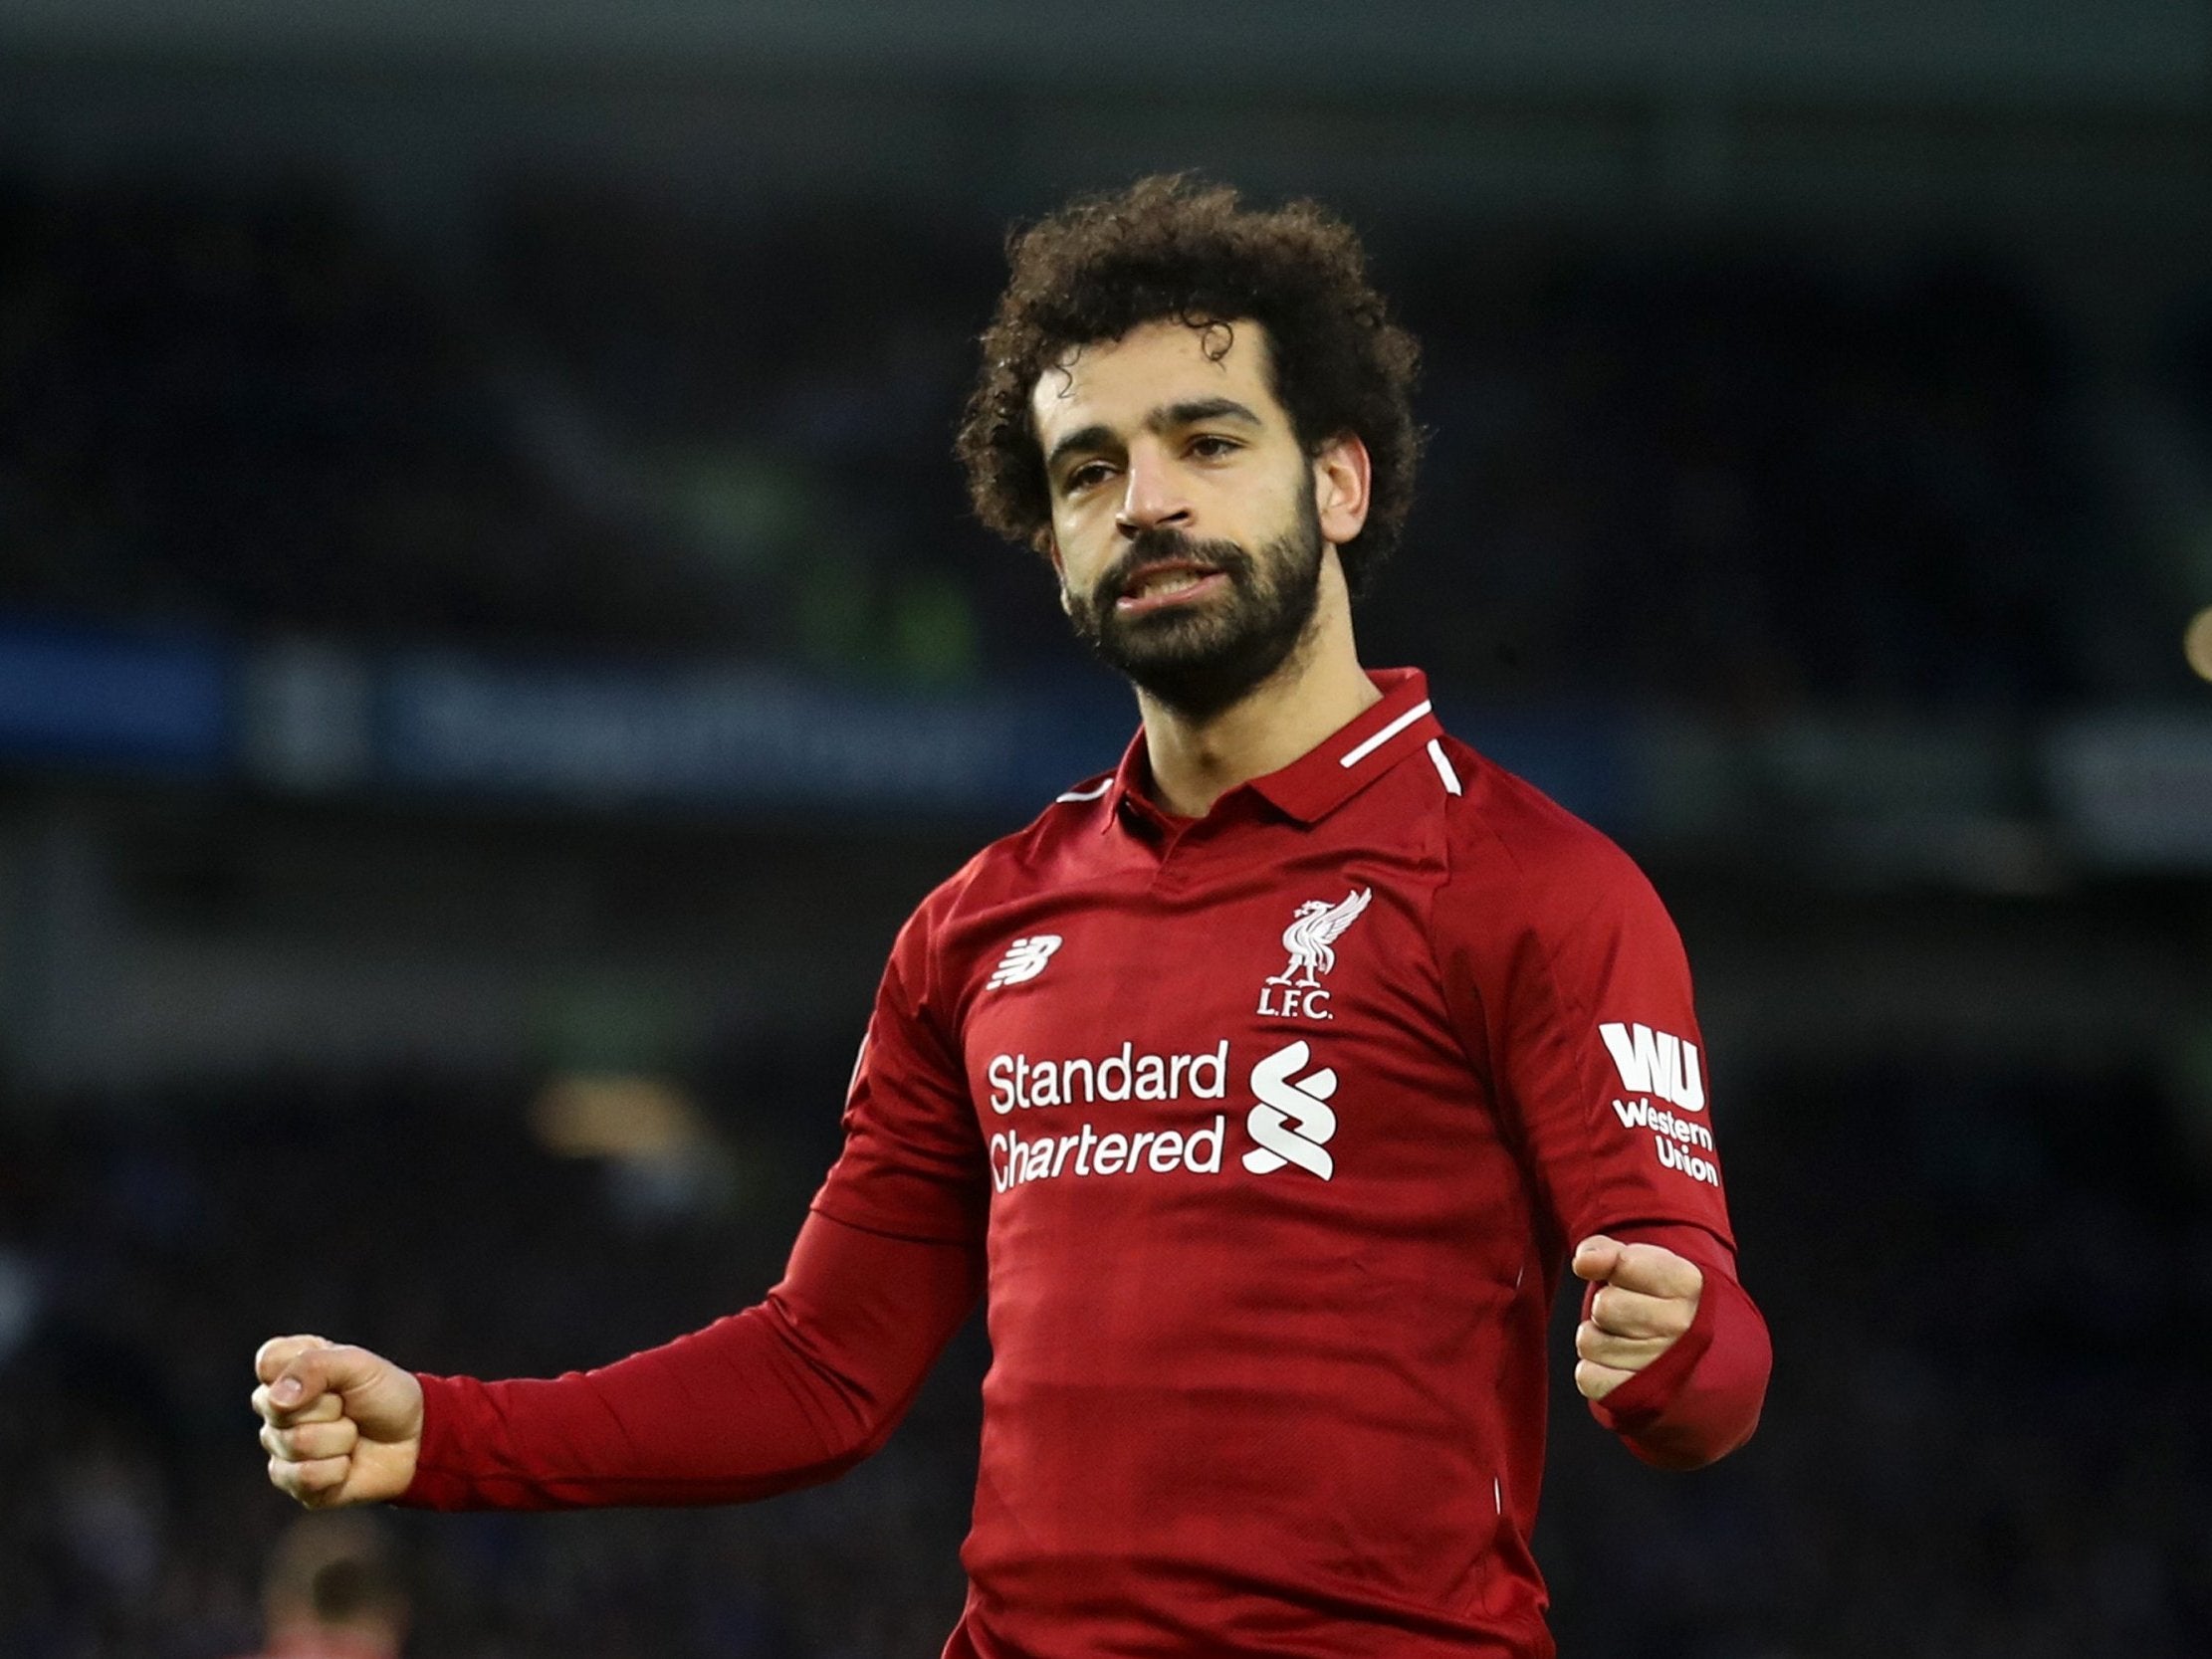 Mohamed Salah celebrates after scoring for Liverpool from the penalty spot against Brighton